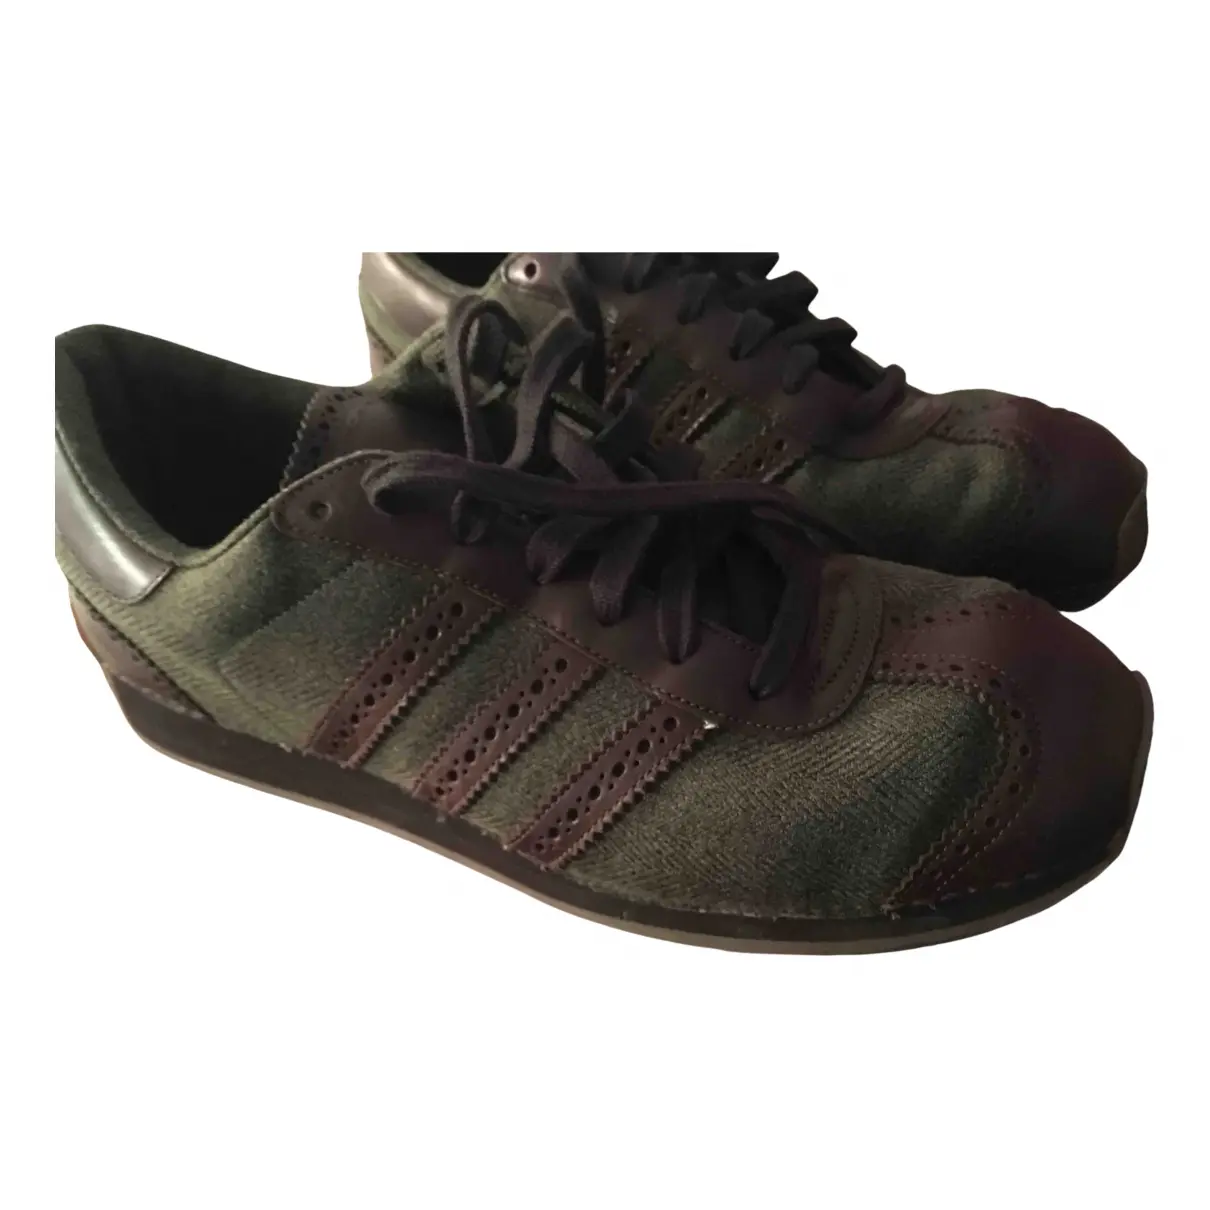 Buy Adidas Cloth low trainers online